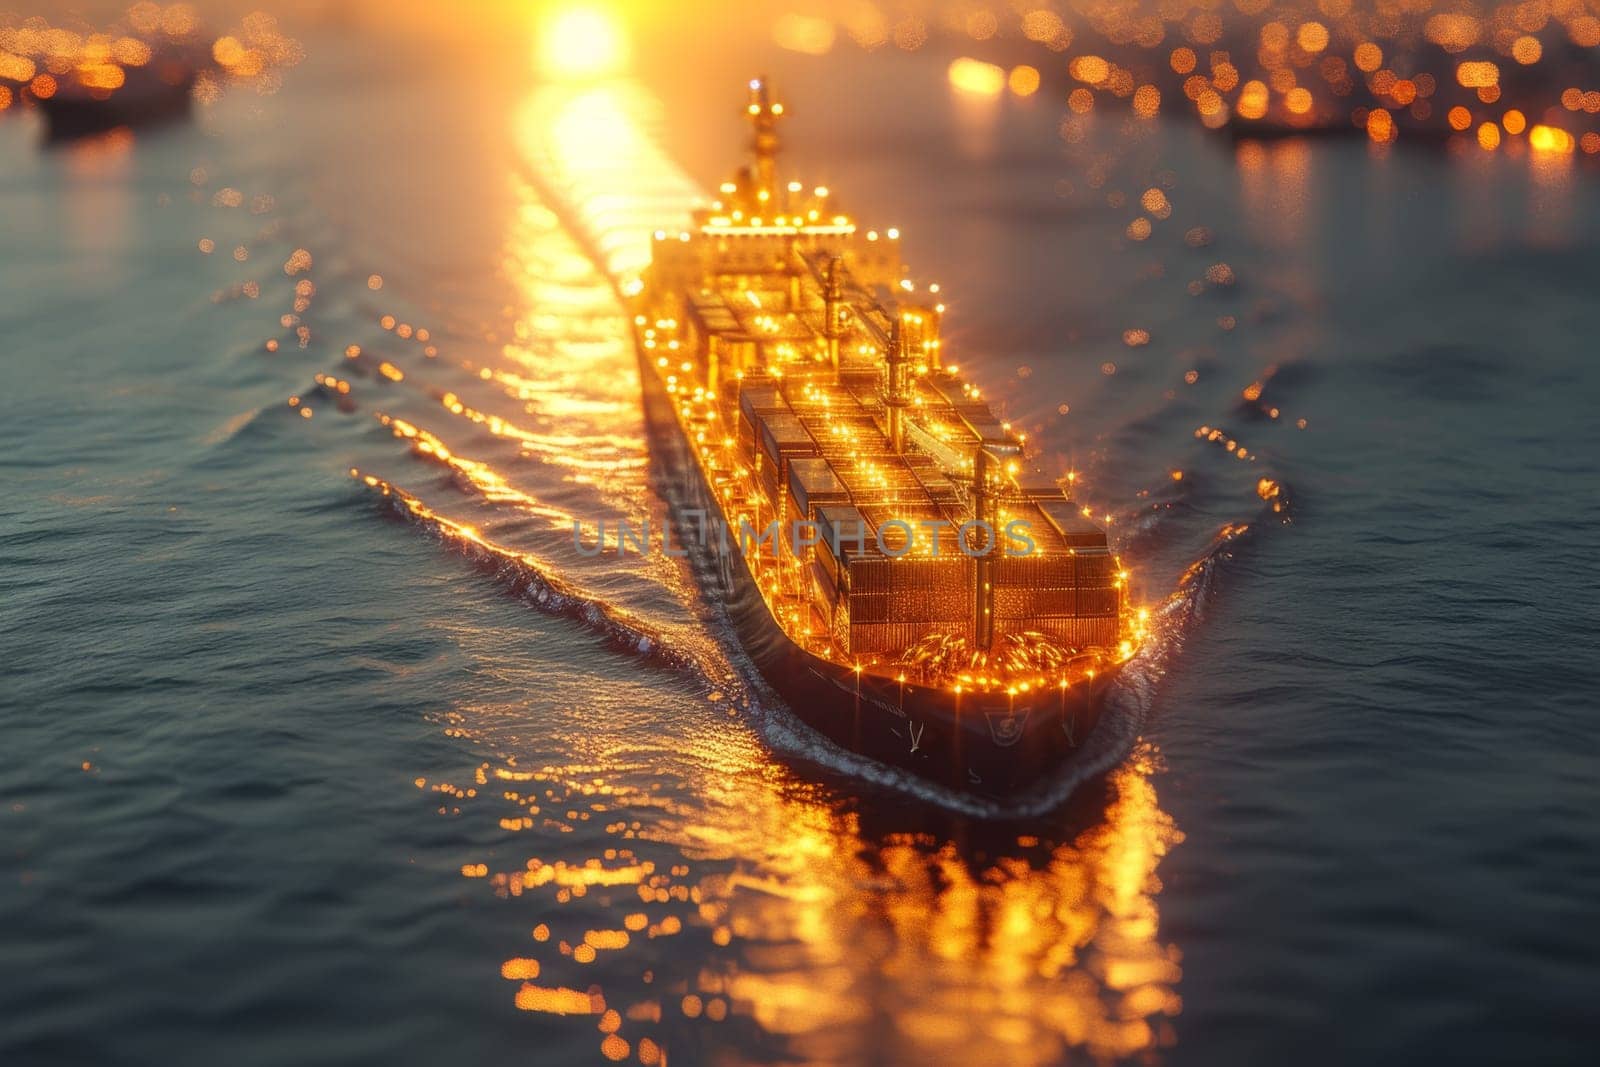 A ship with gold containers carries cargo by sea. Container ship.